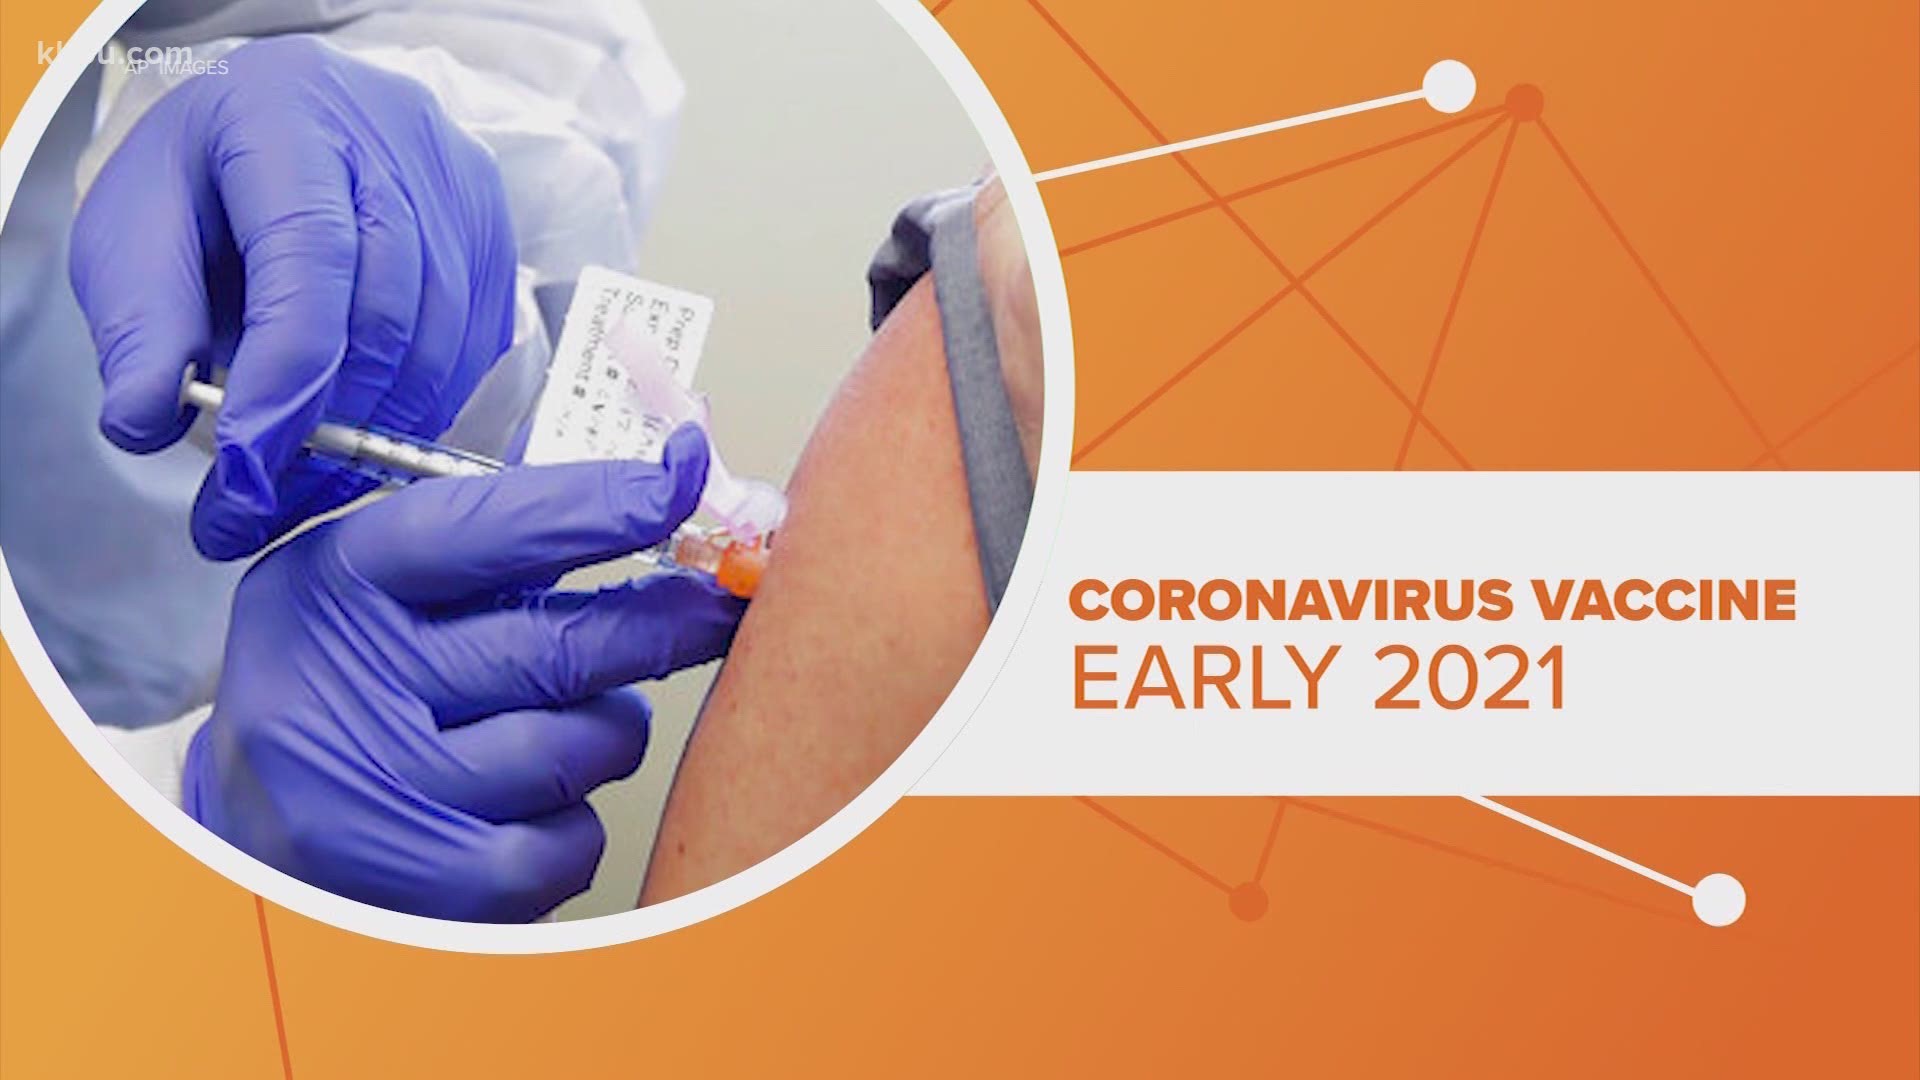 Many are hoping that a COVID-19 vaccine will mean a quick end to this pandemic, but health experts warn it's not quite that simple.